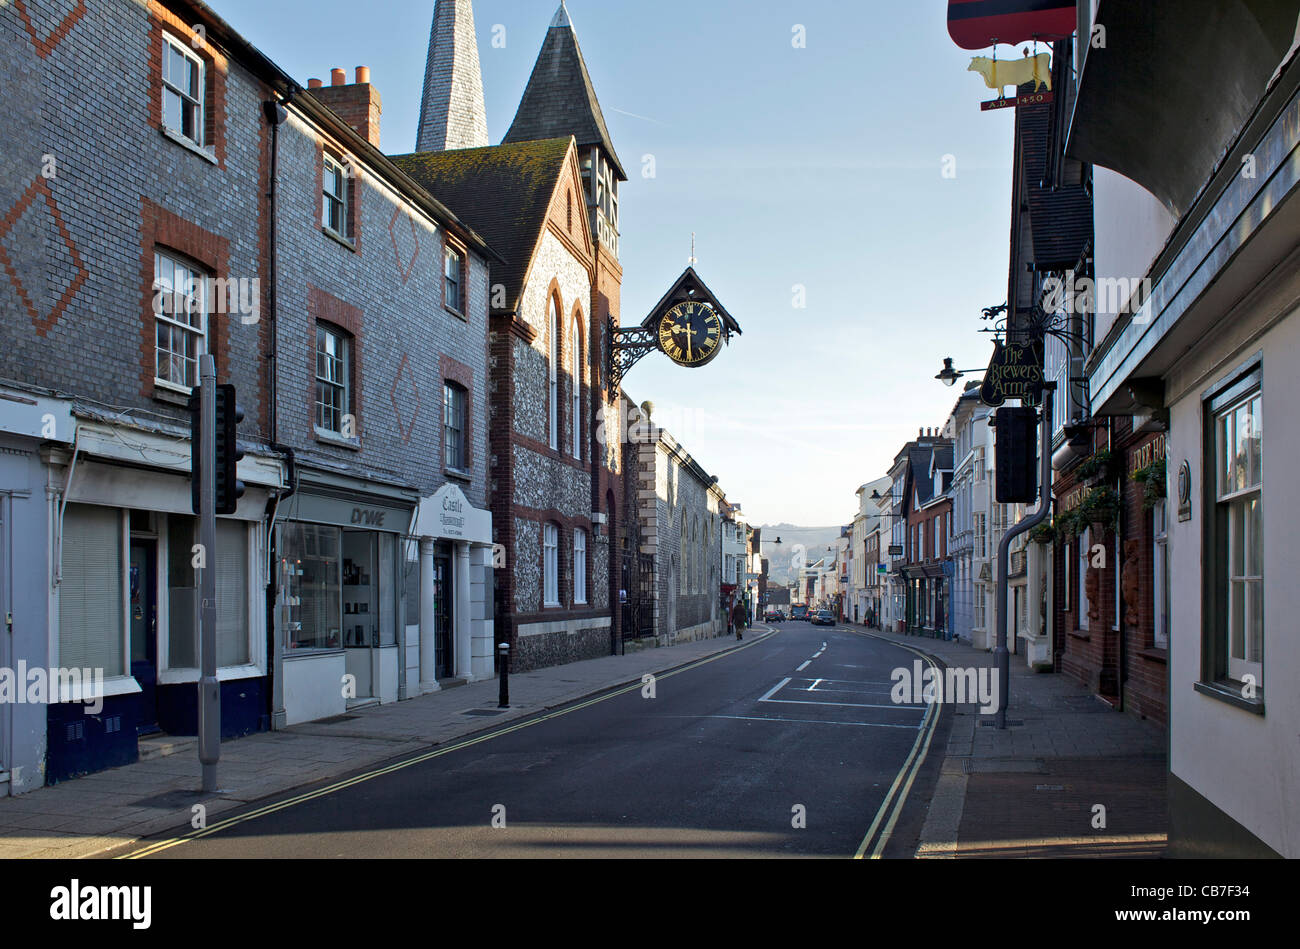 Main street in Lewes with no cars Stock Photo